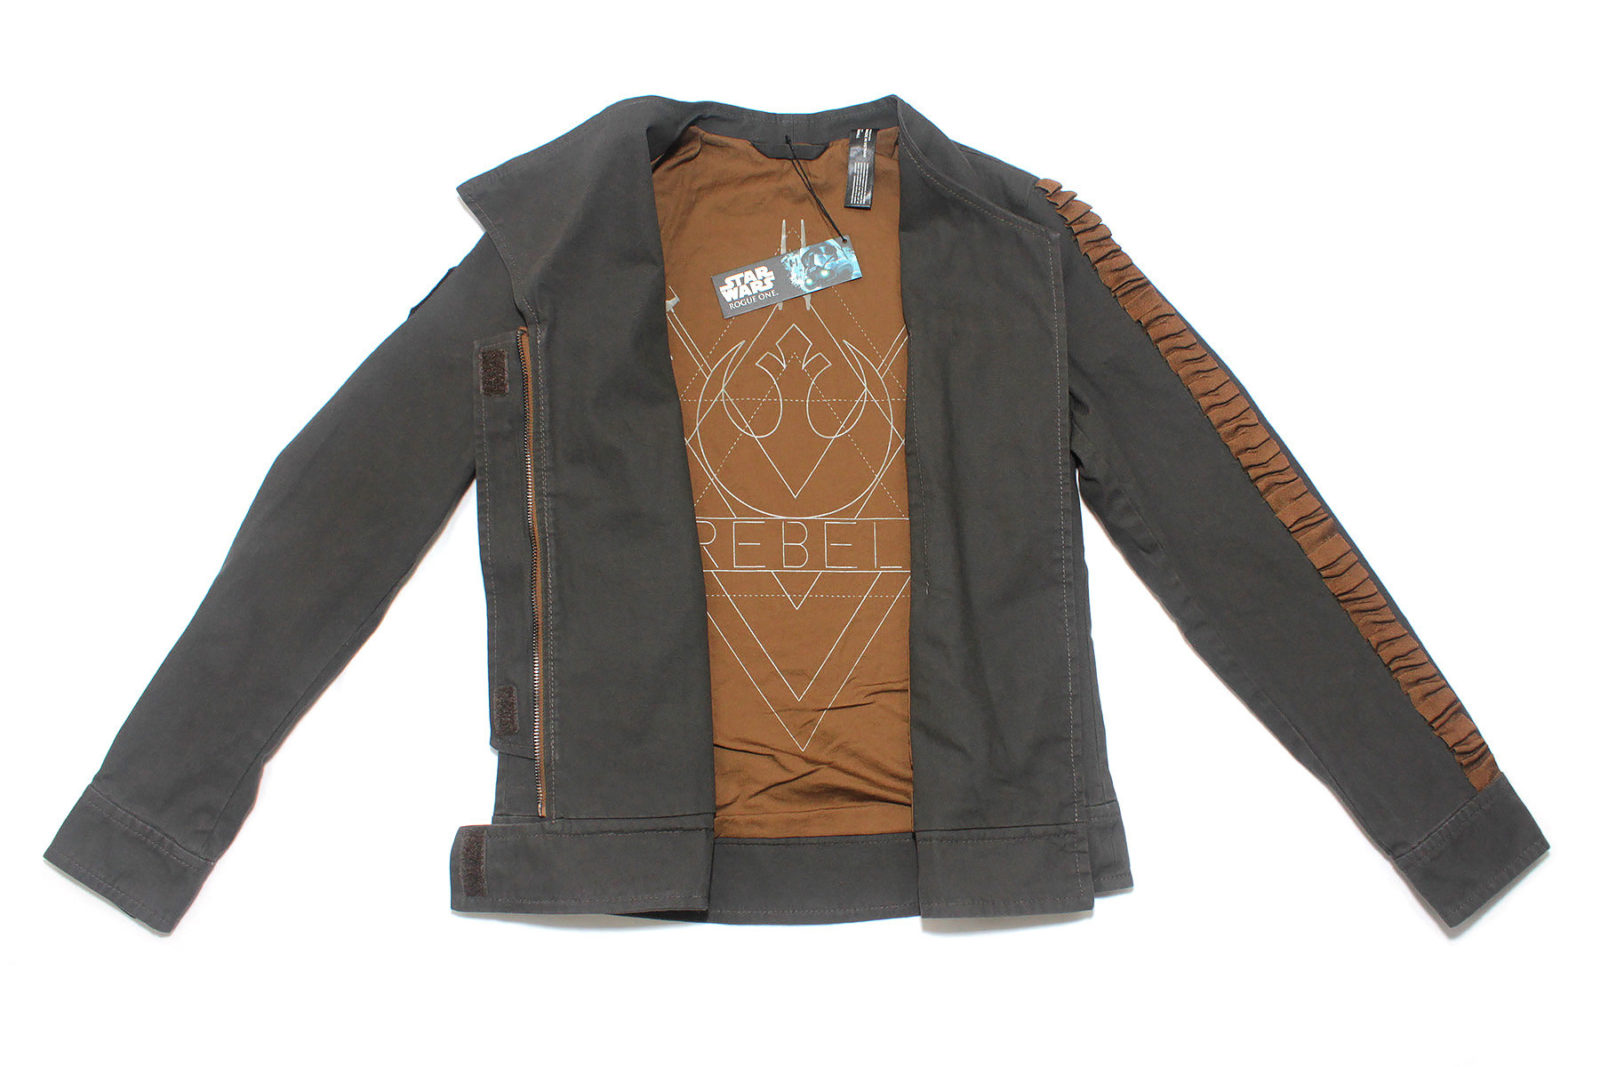 Review – Musterbrand Jyn Erso jacket